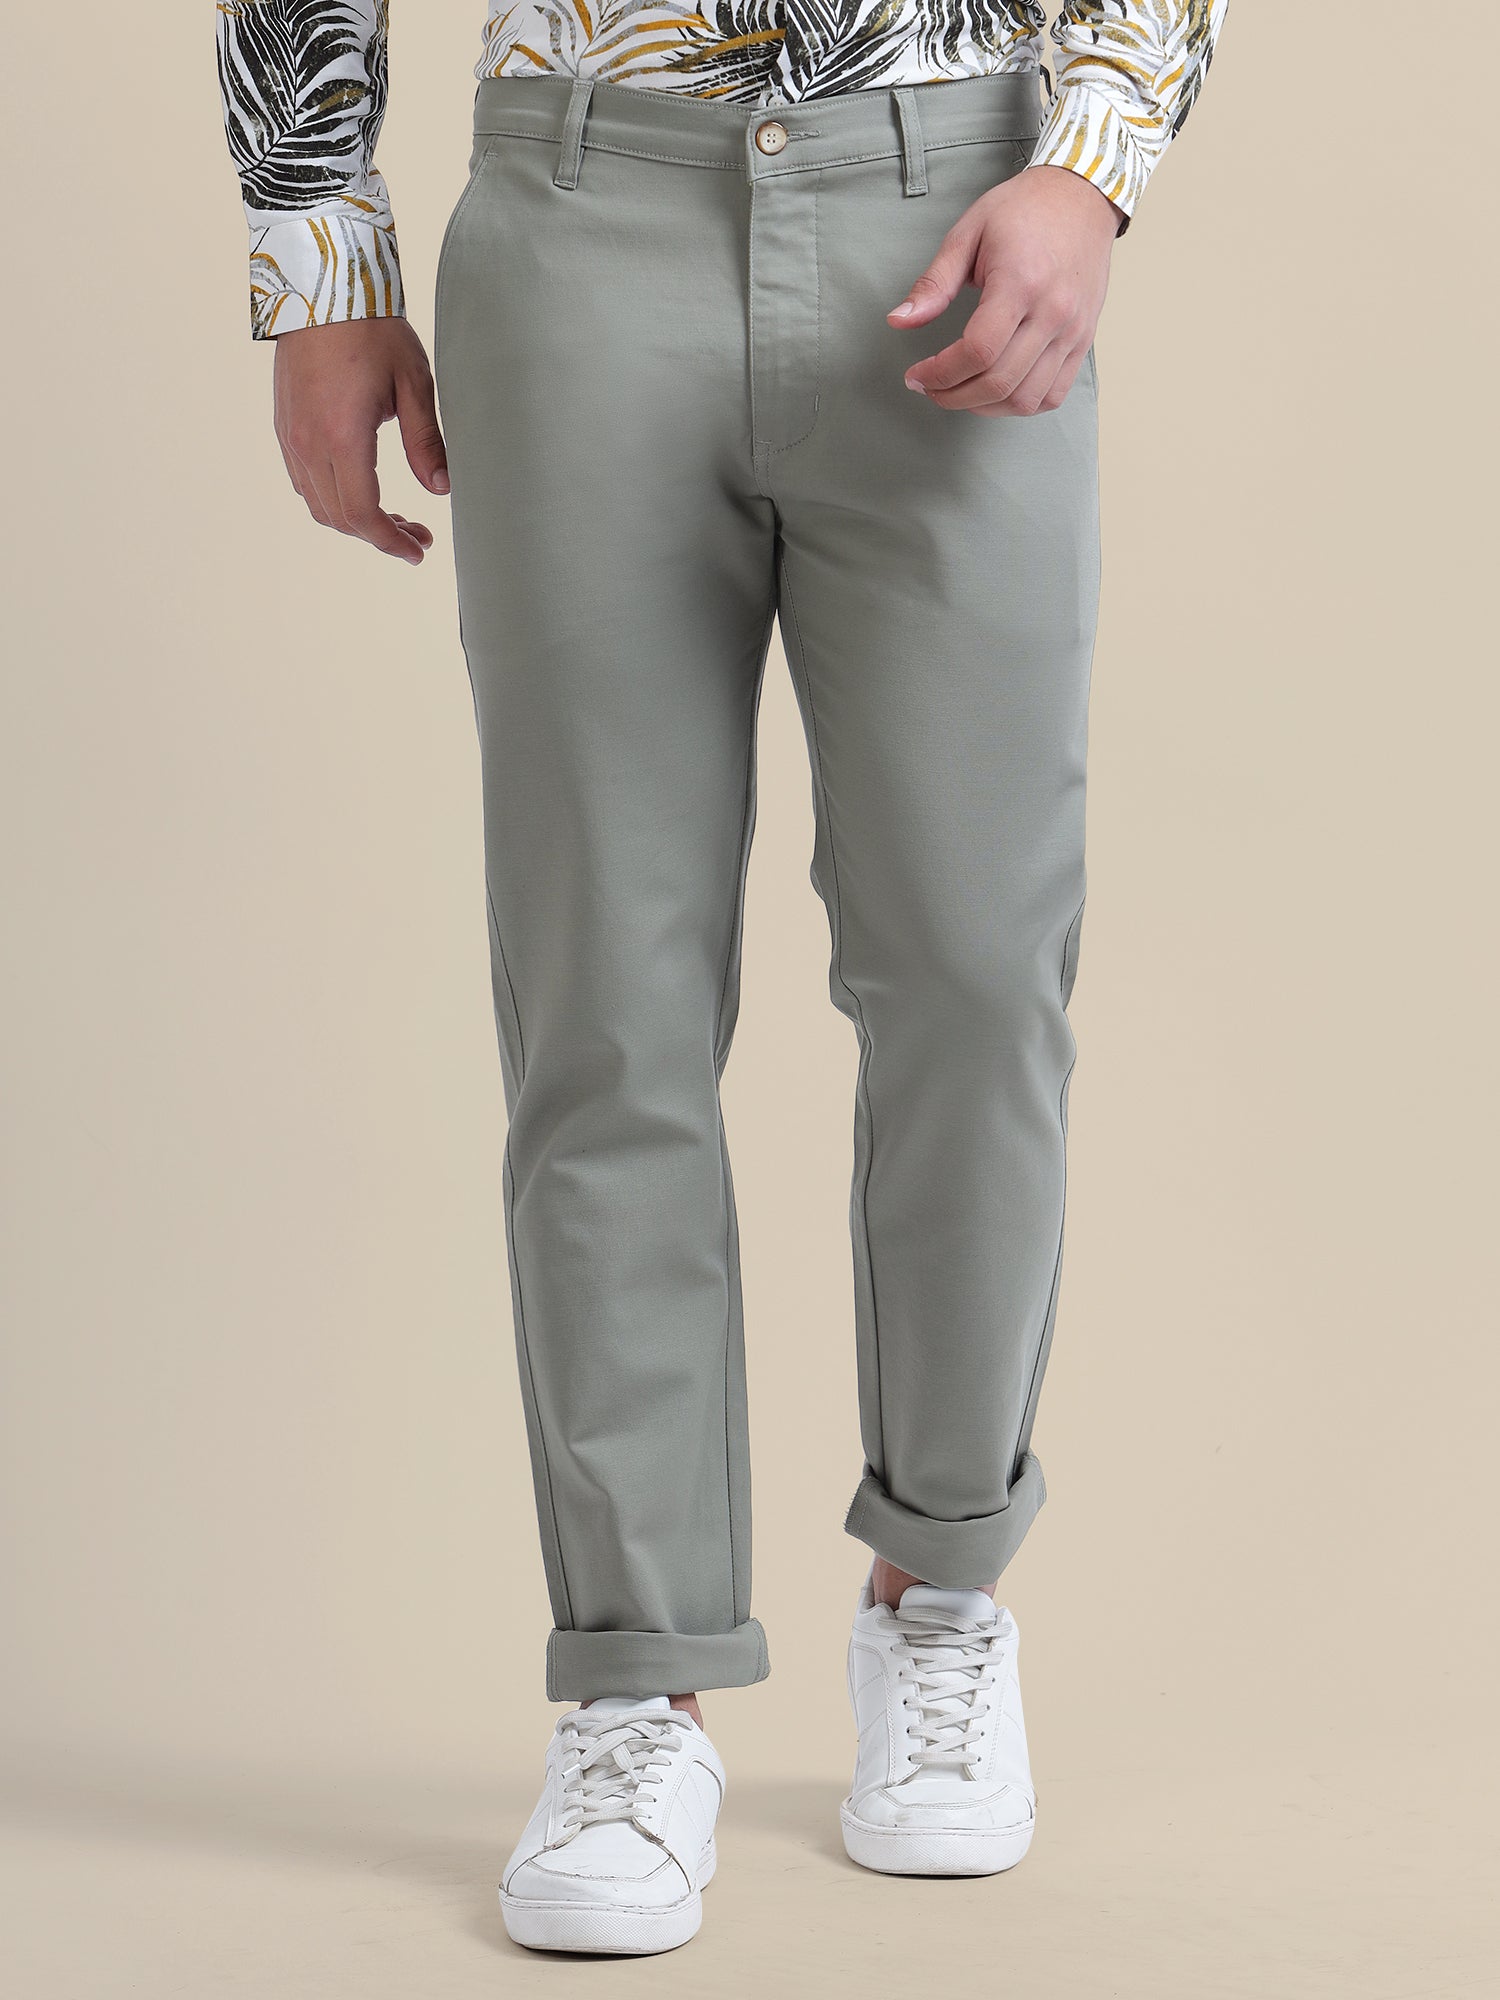 AMSWAN  MEN'S GREY CASUAL TROUSERS - SOLID COTTON LYCRA, SMART FIT